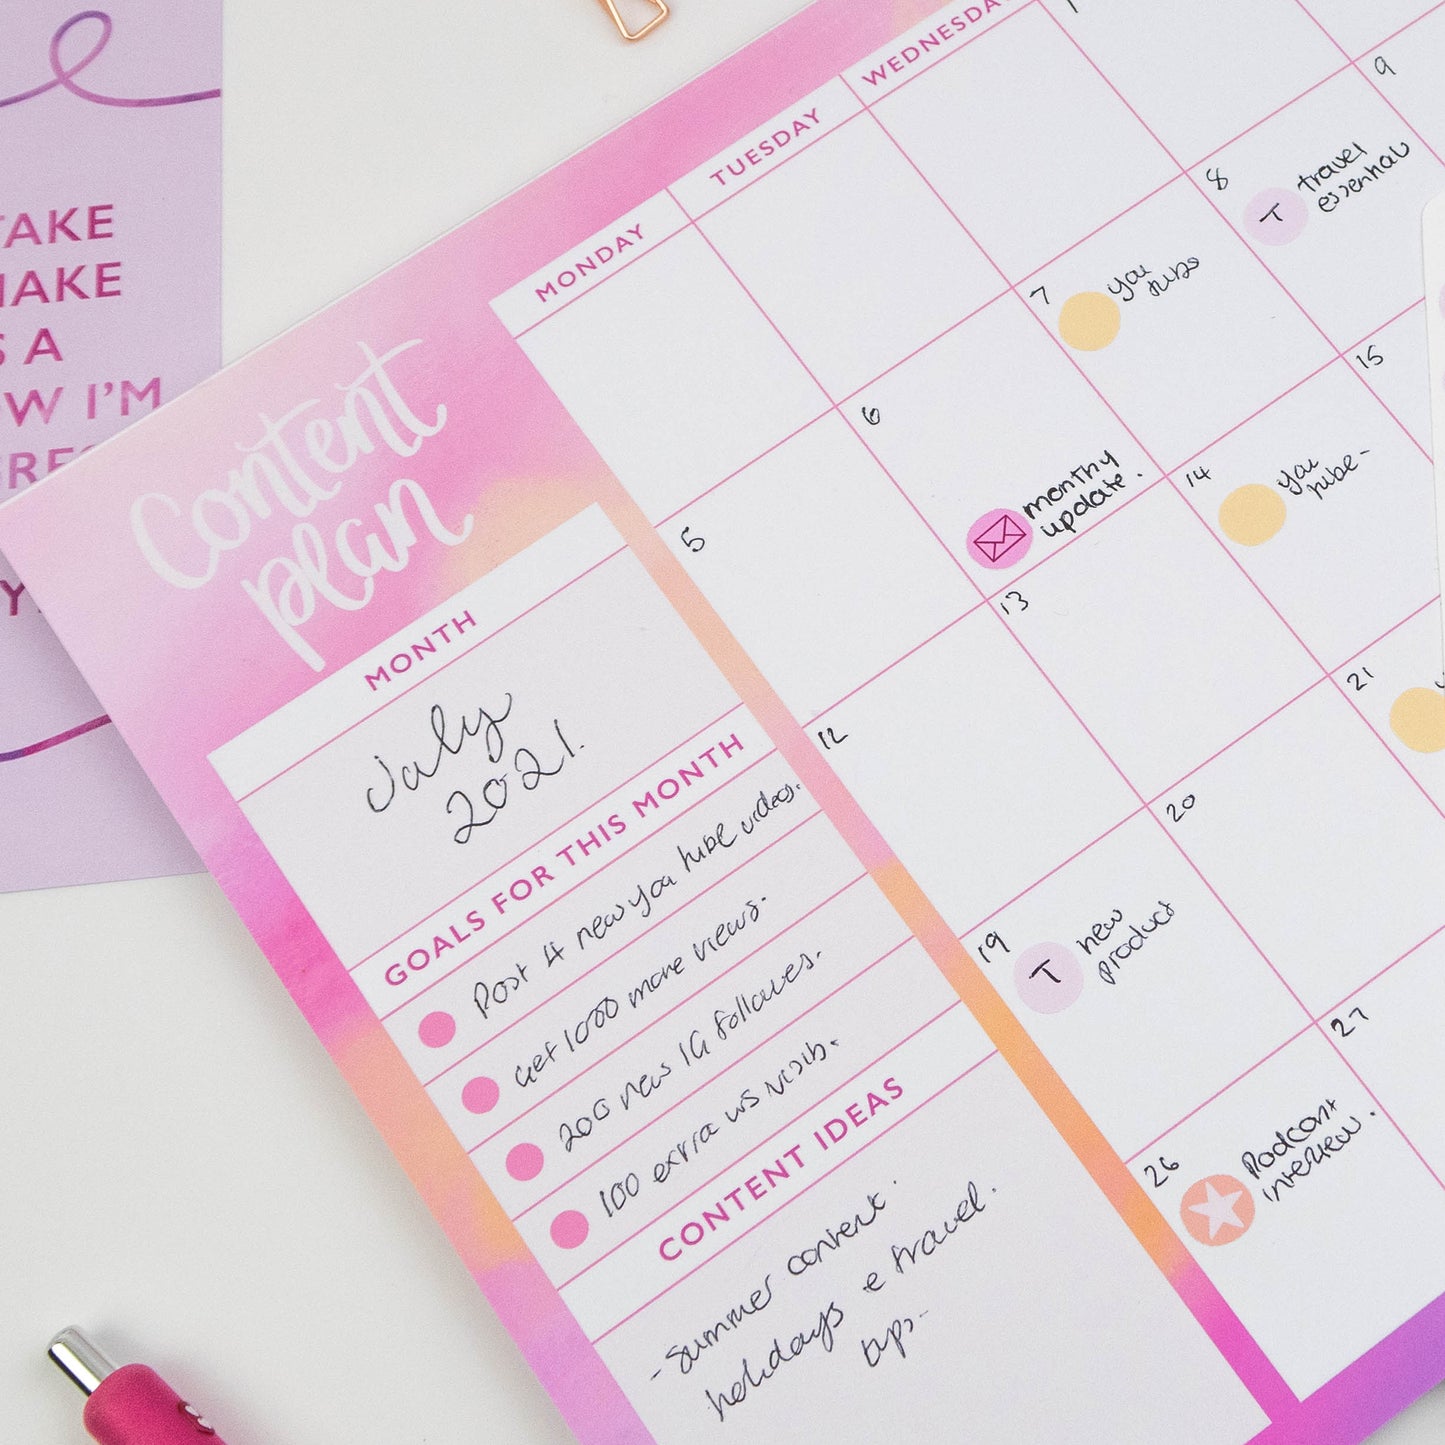 CONTENT PLANNER PAD & STICKERS